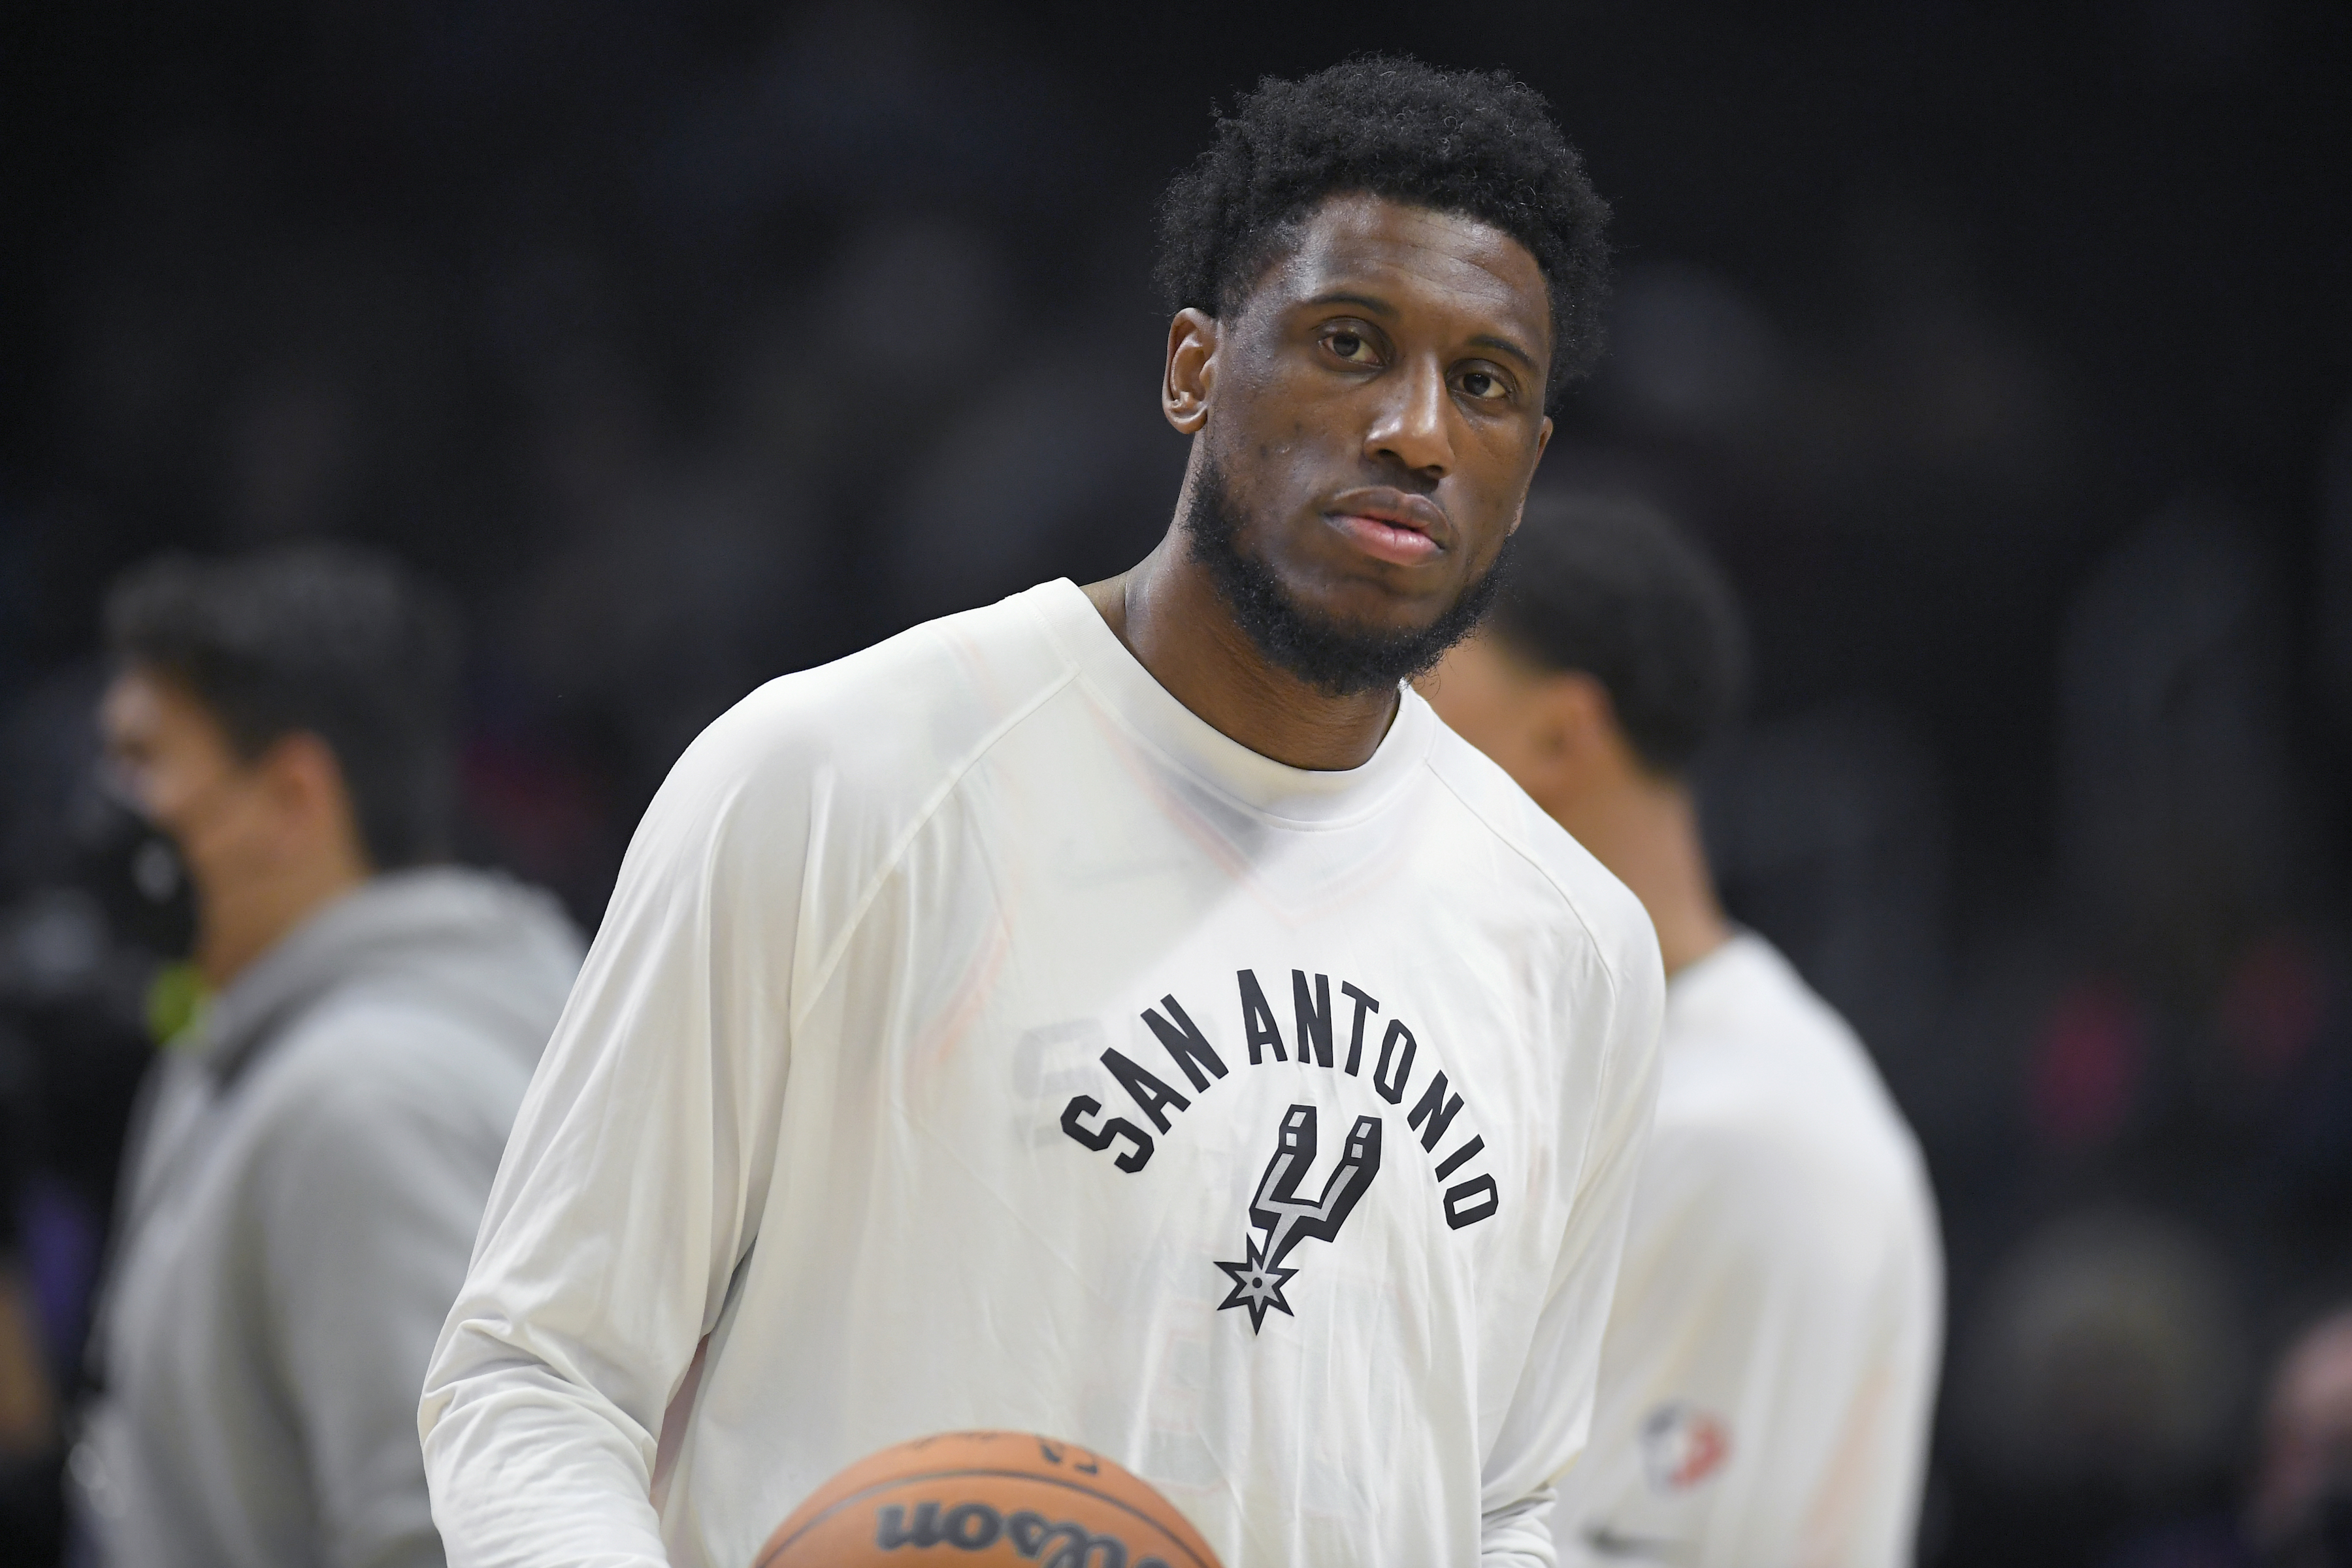 Former San Antonio Spurs forward and now Toronto Raptors big man Thaddeus Young warms up before an NBA game in December 2021